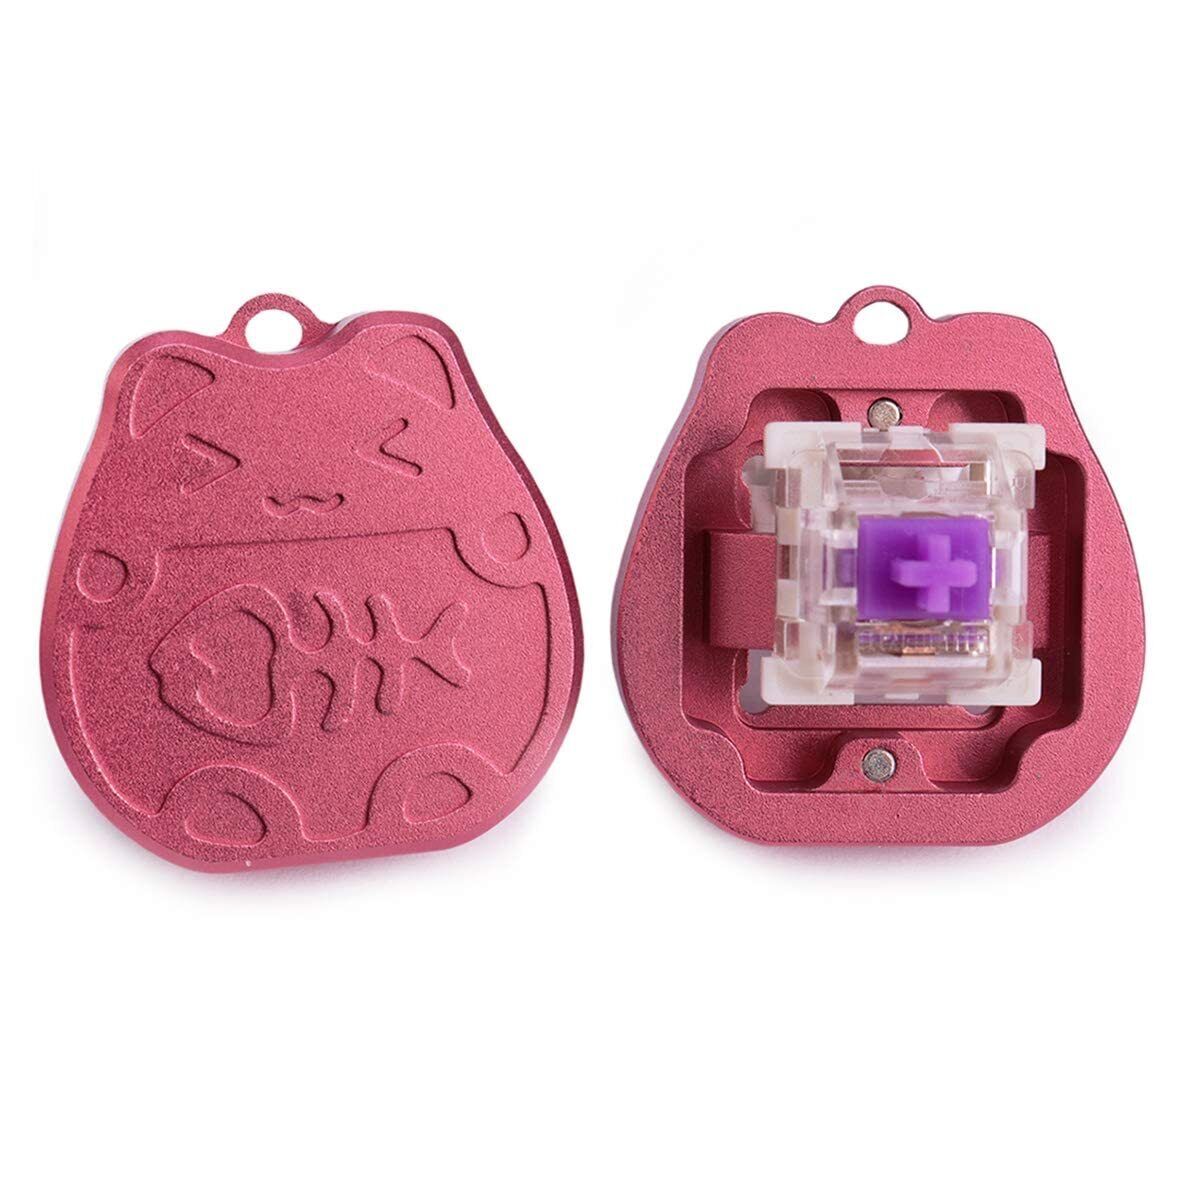 Switch Opener Lucky Cat Aluminum for Kailh Gateron Cherry MX Switches Mechani...